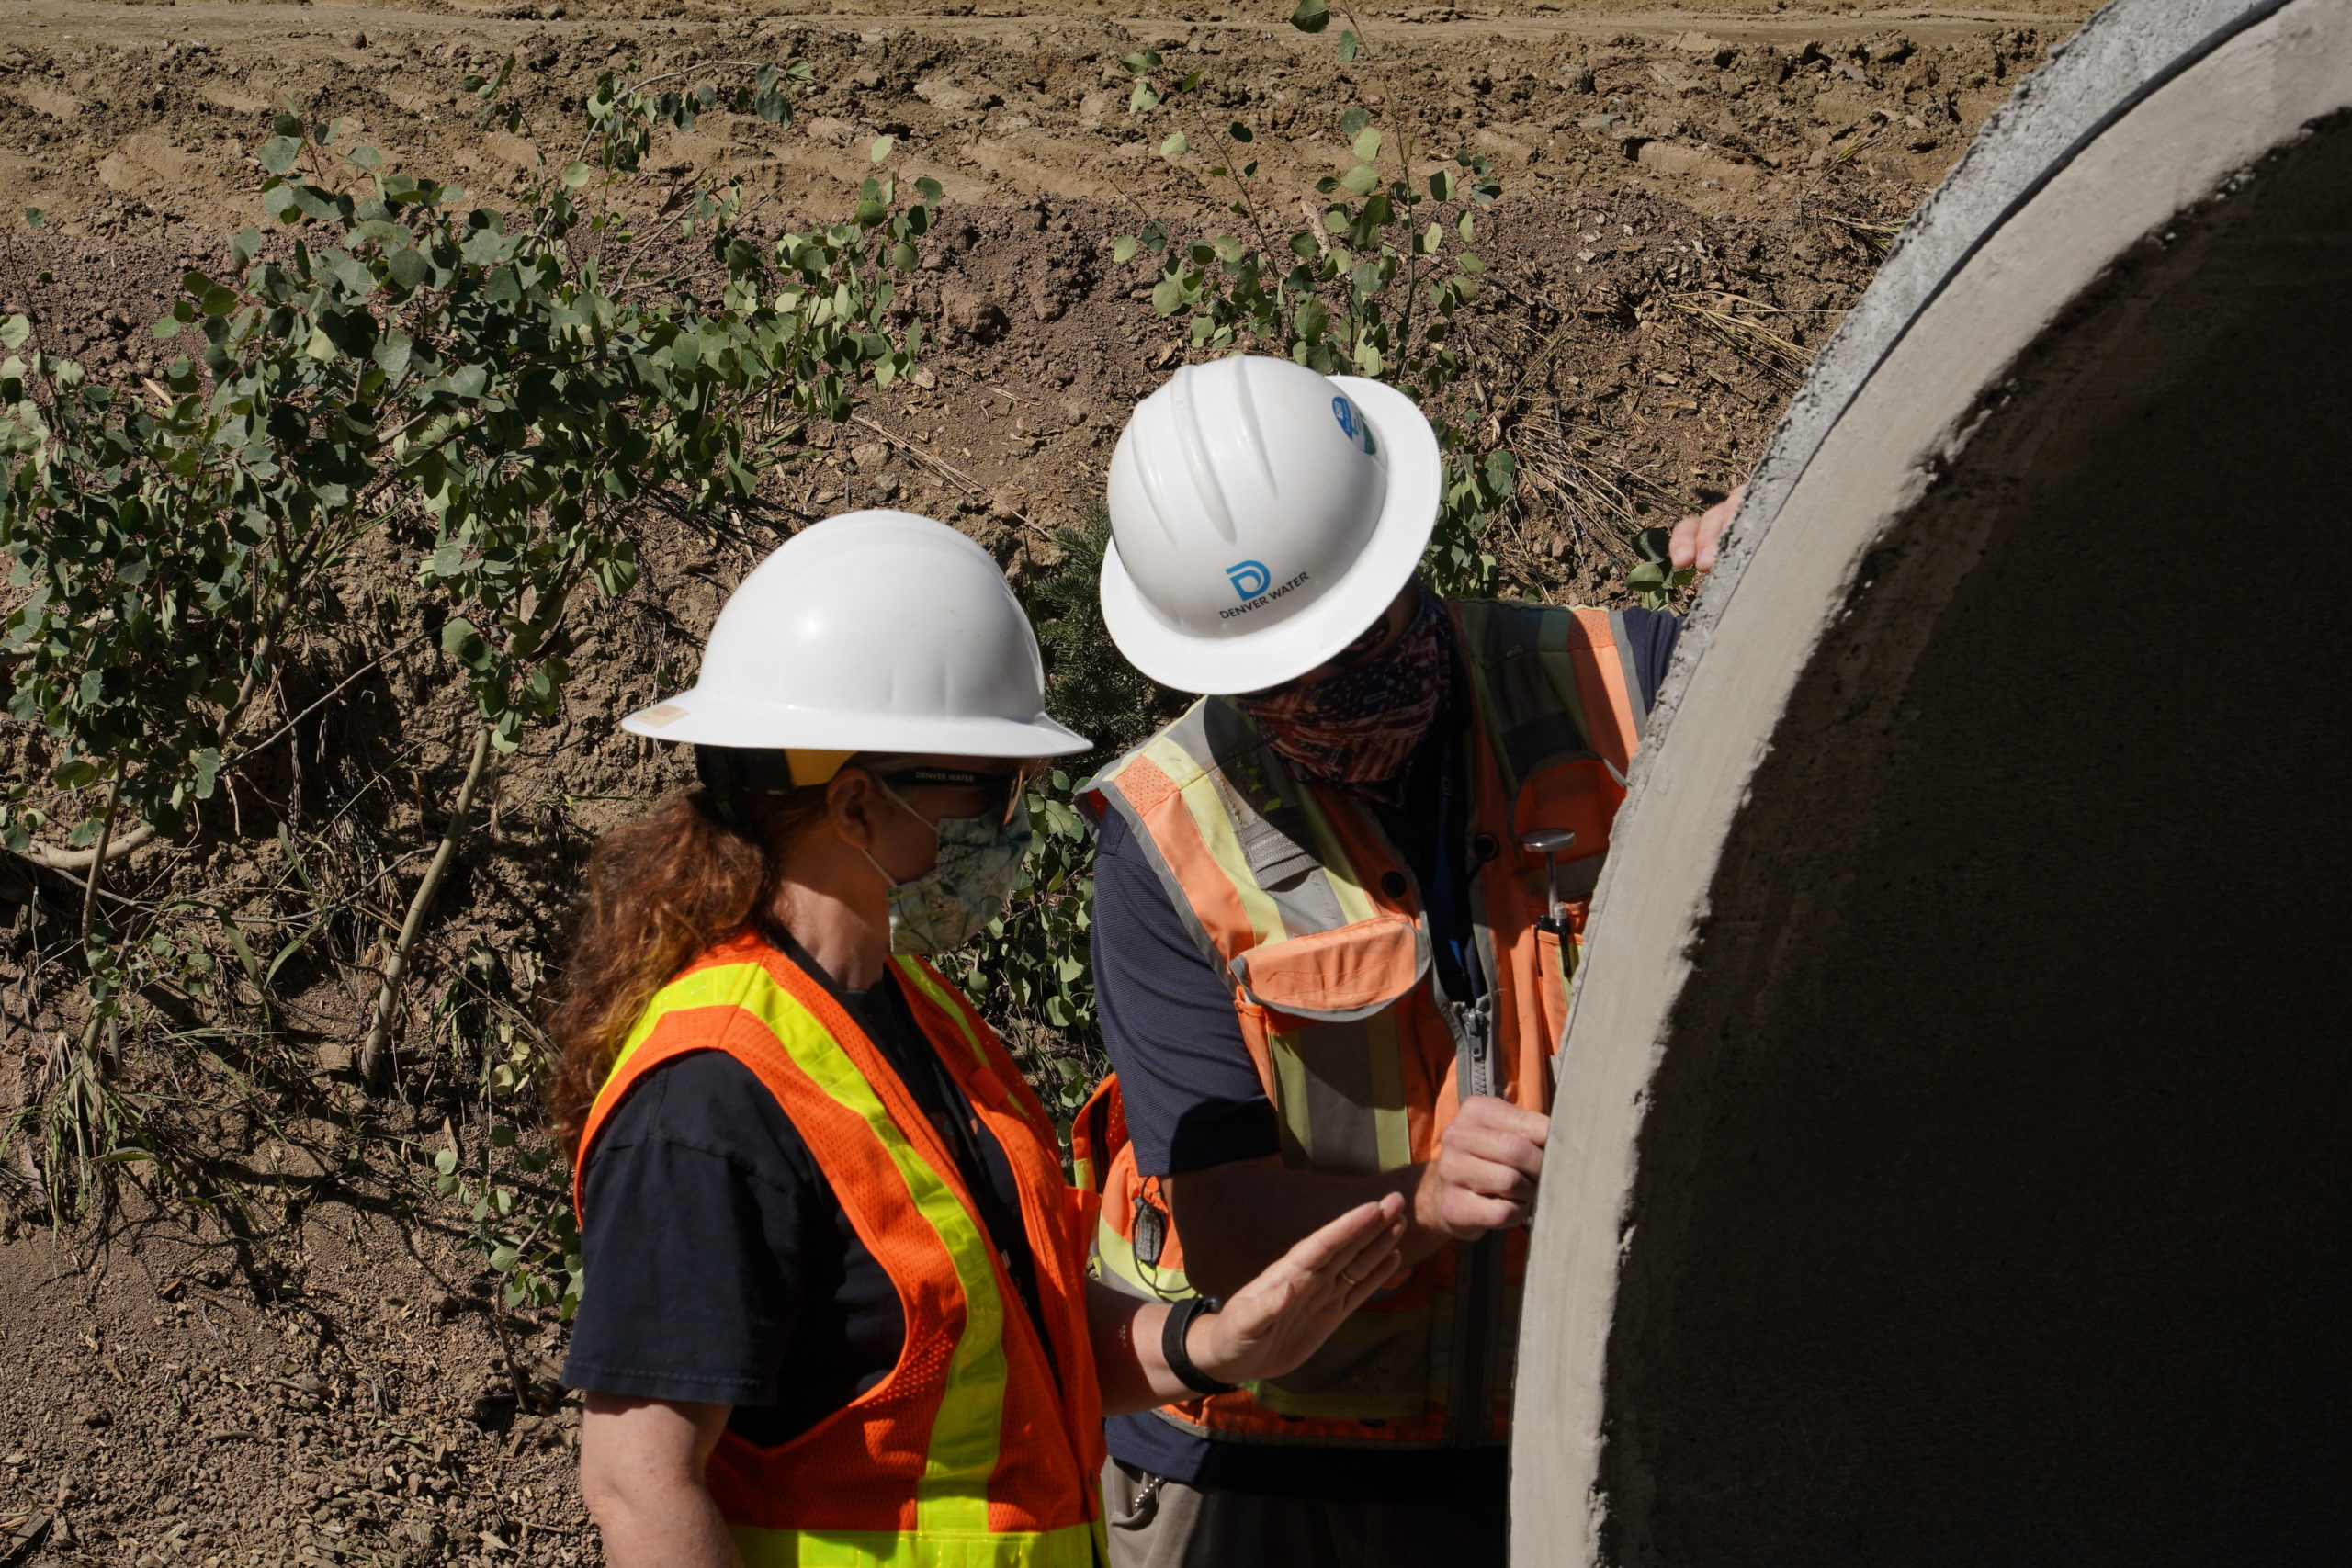 Denver Water project engineer Jessica Barbier (L), and construction project inspector Chris Crumley, check out sections of the new pipe before installation. Photo credit: Denver Water.